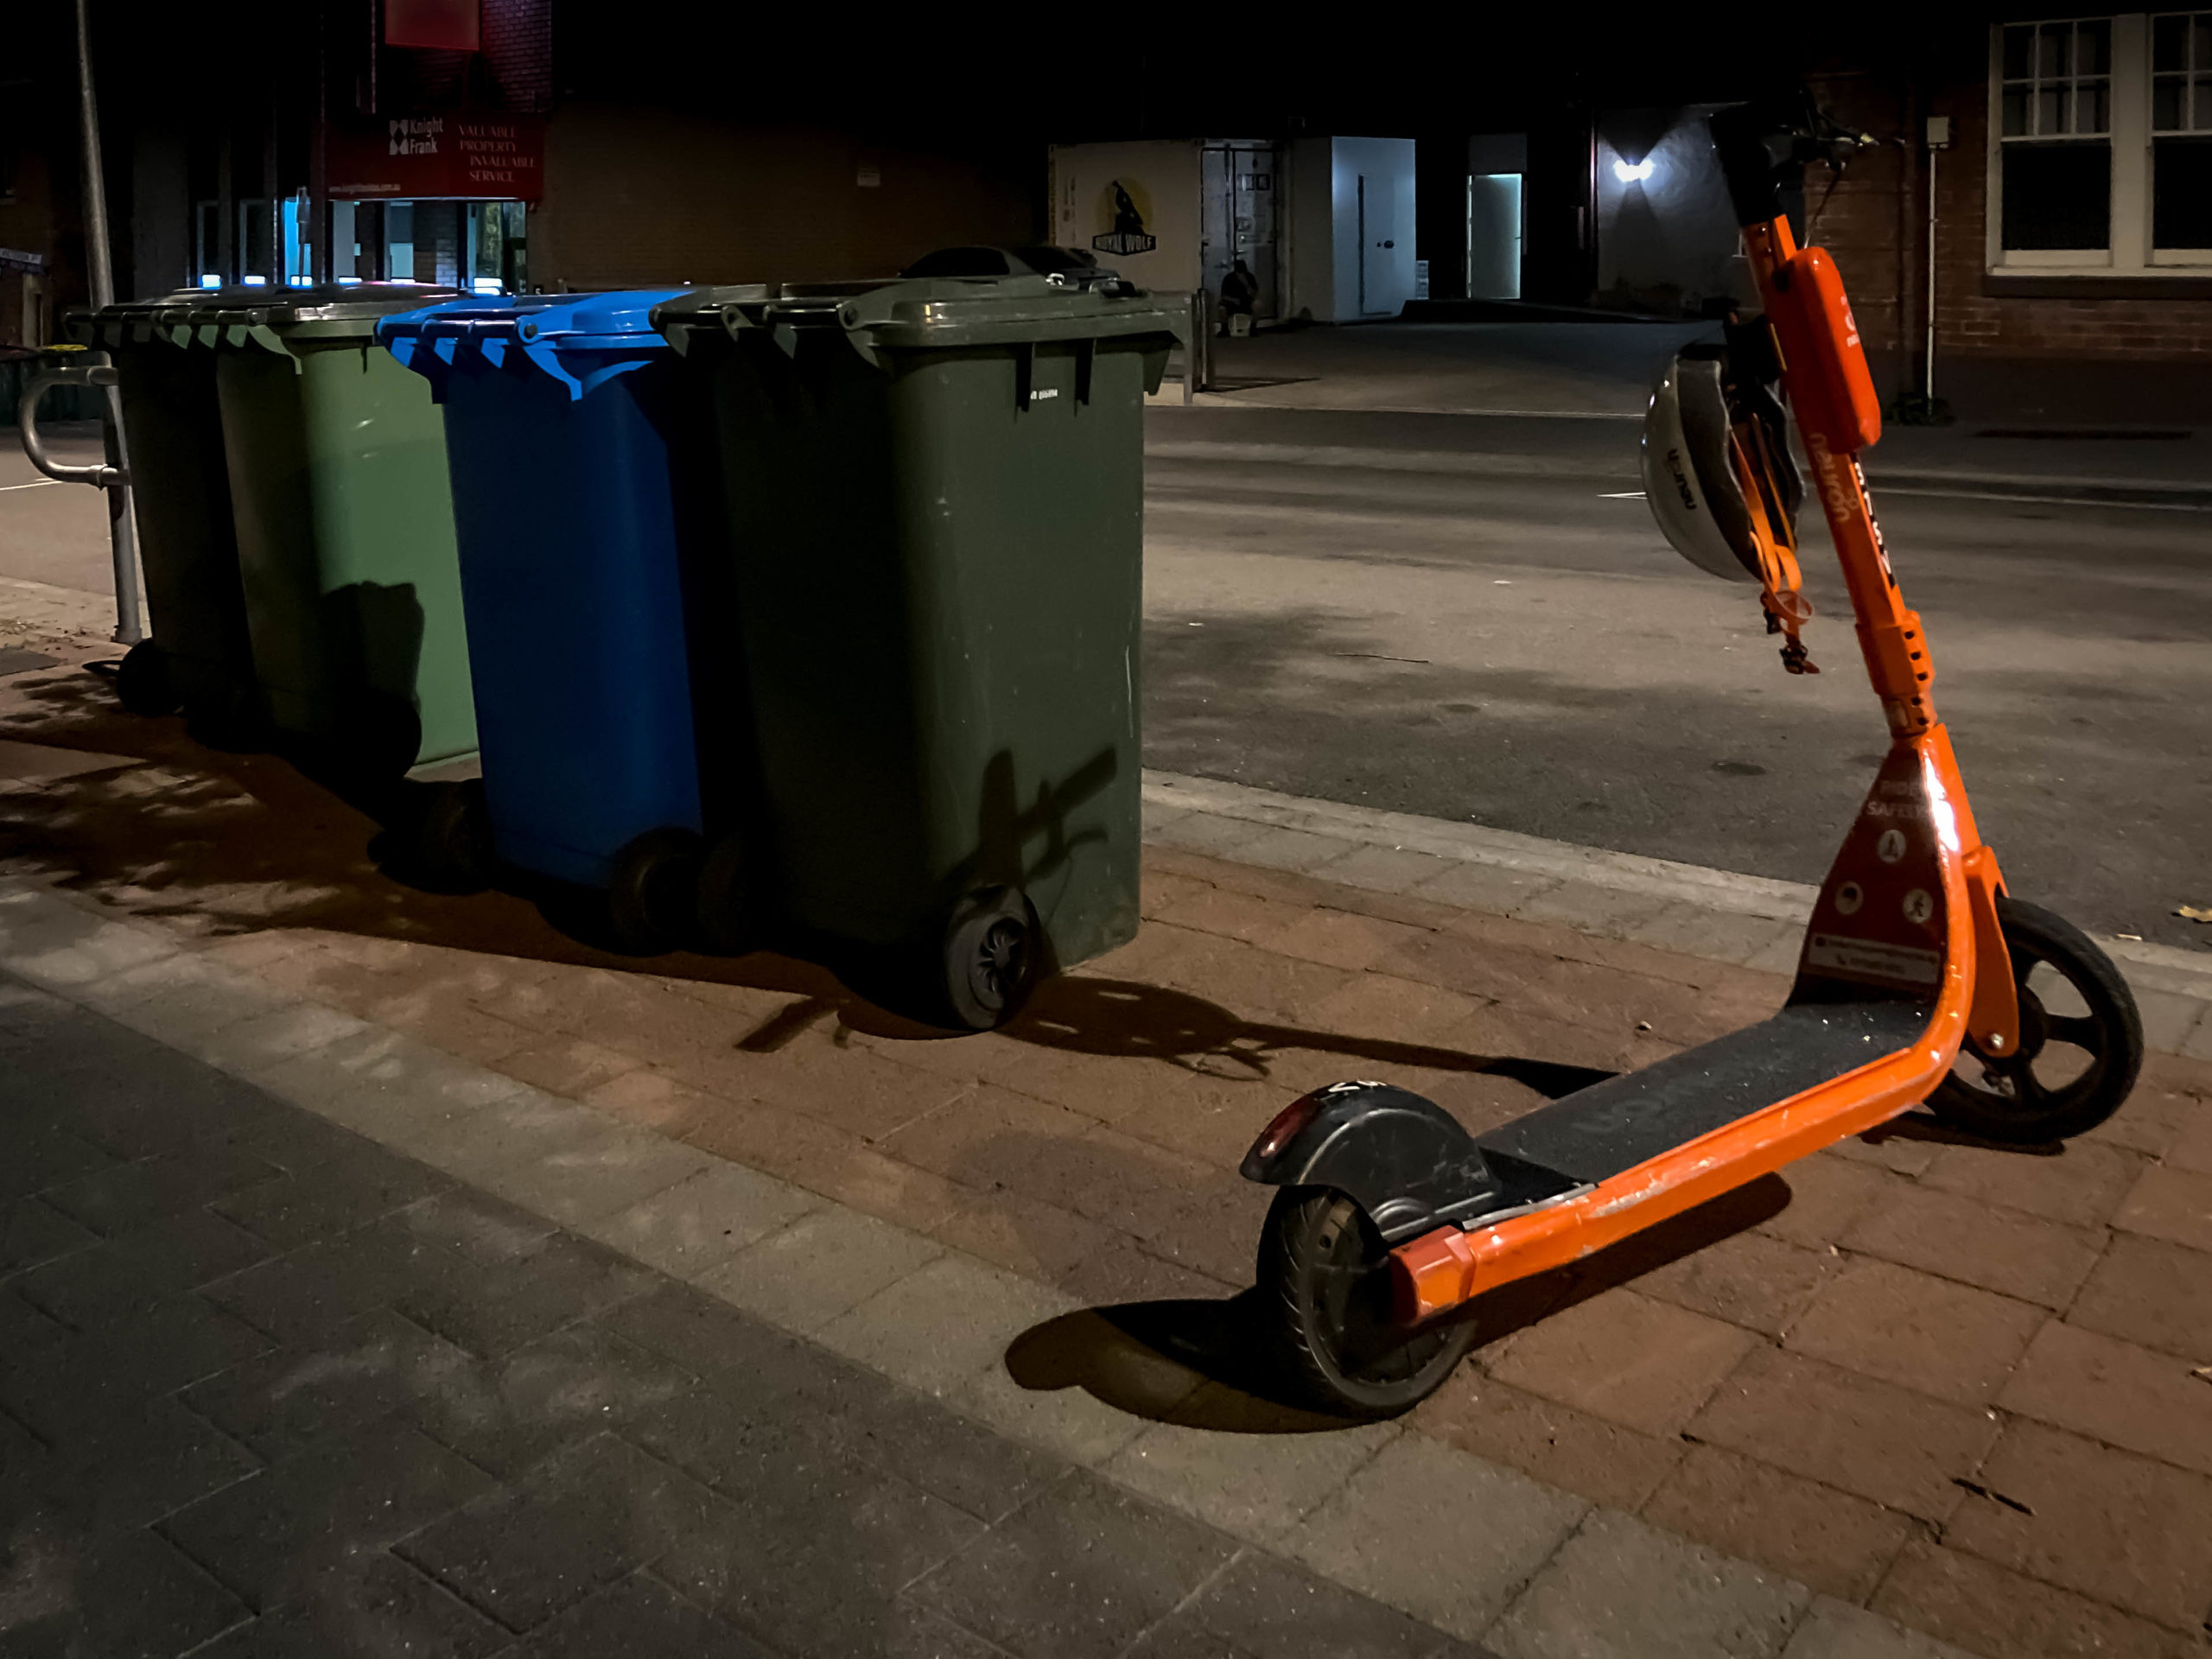 An orange e-scooter parked next to a row of bins in a dark street